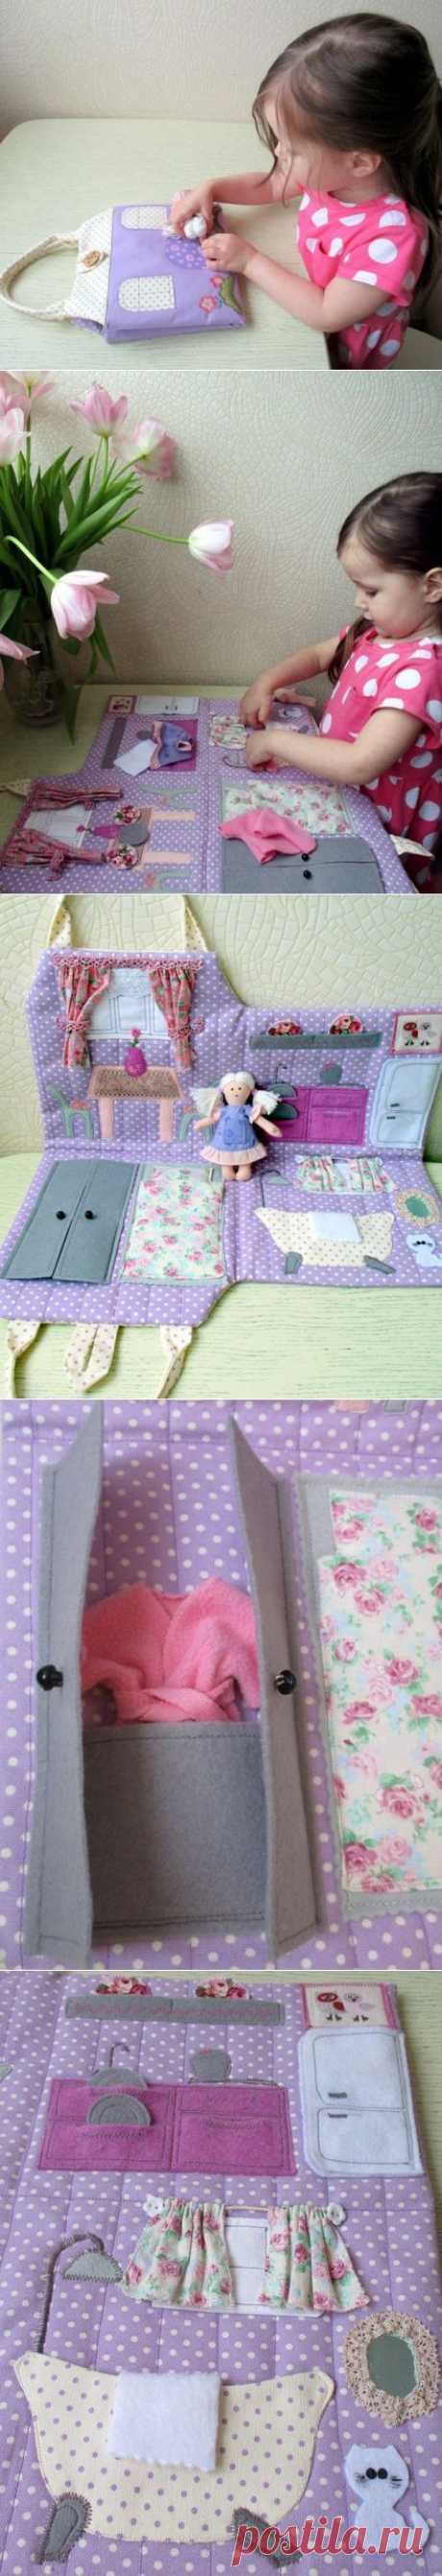 Sewing dolls house quiet books 40 Ideas